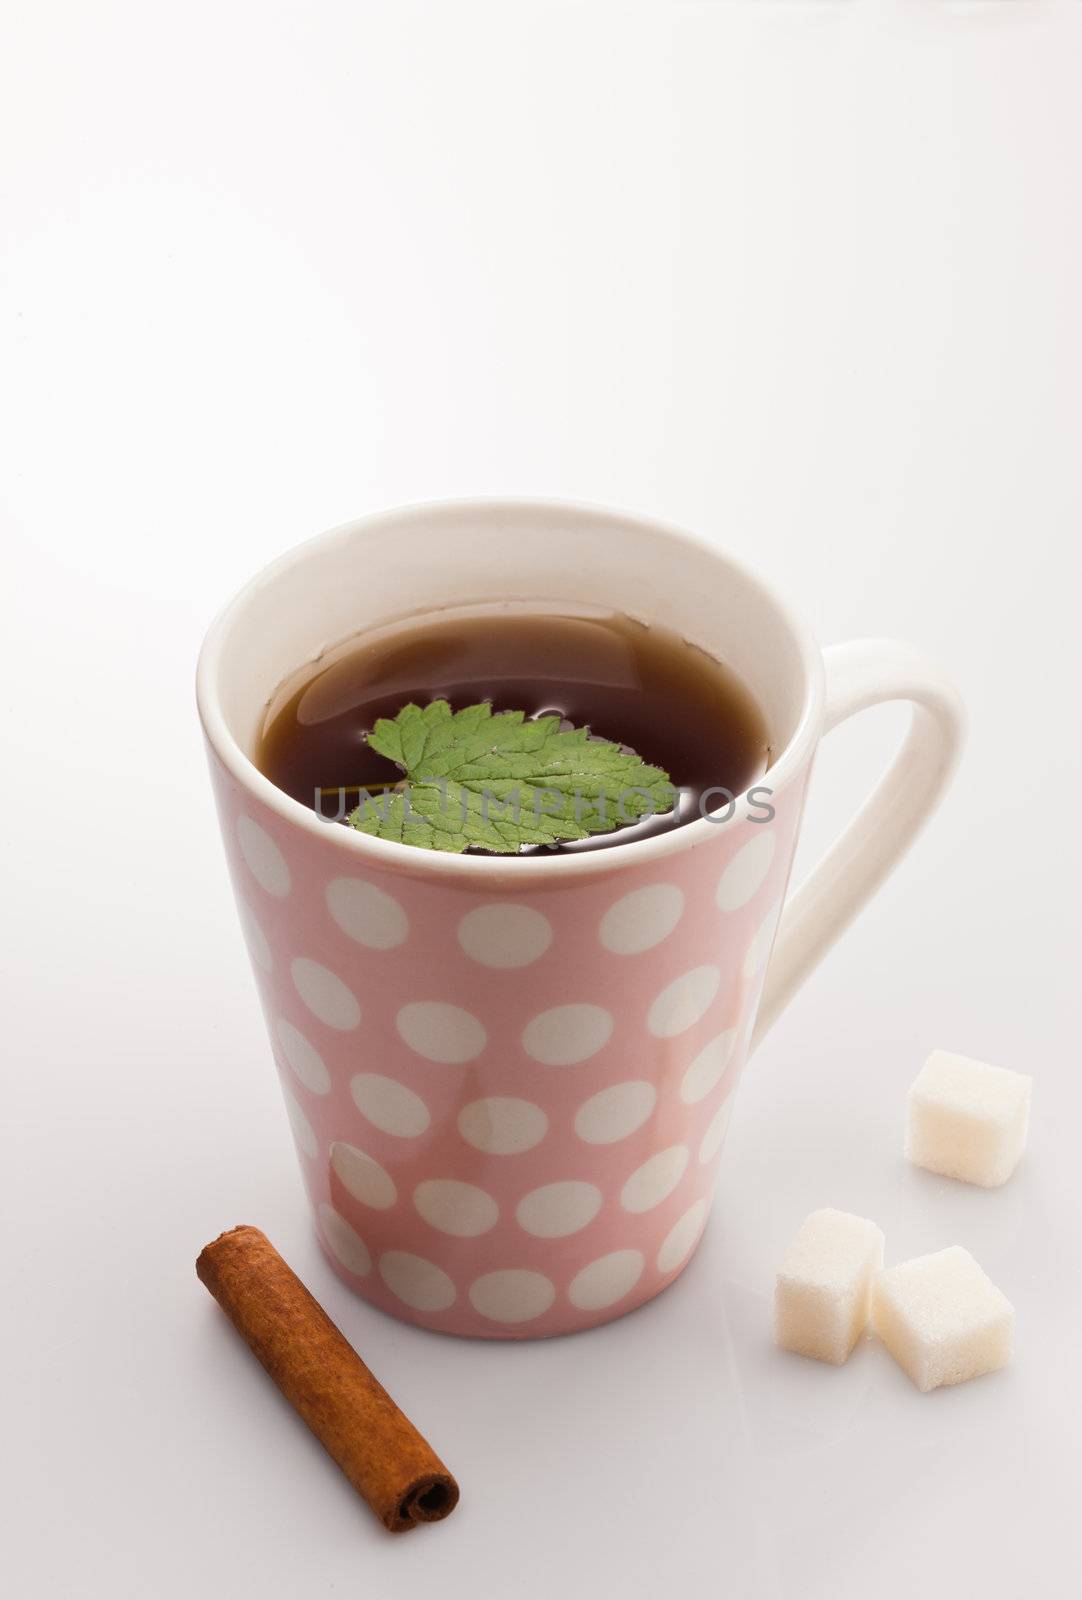 hot tea with leaf of mint and cinnamon stick